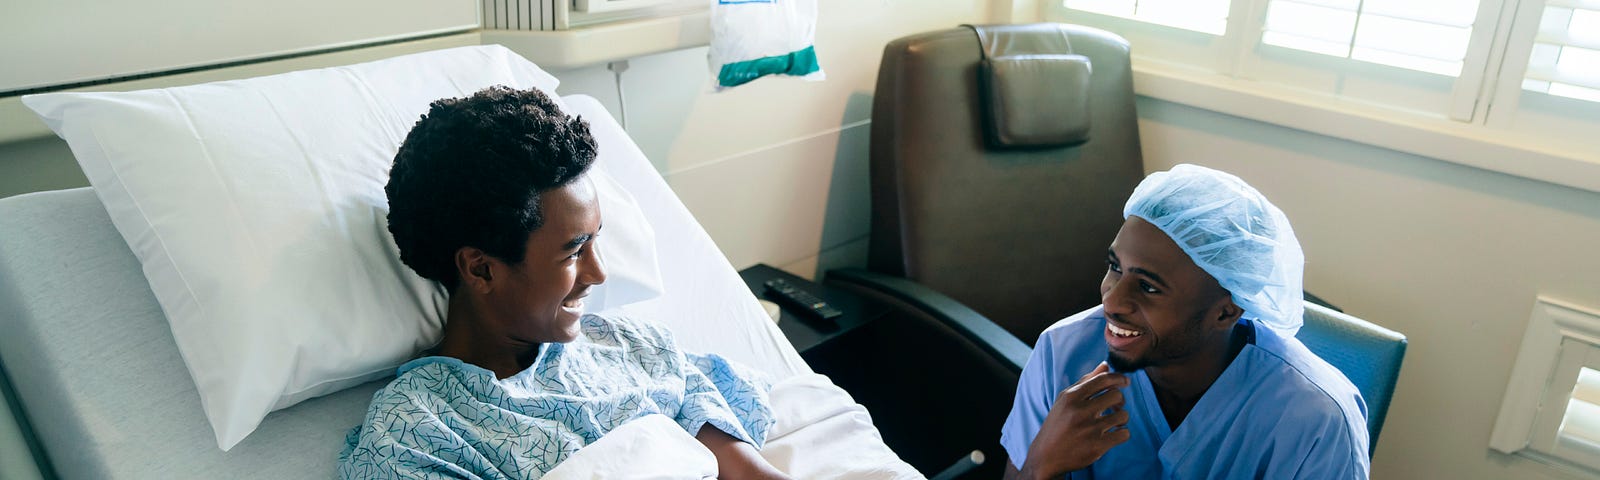 A smiling nurse jokes with a boy patient in a hospital bed.